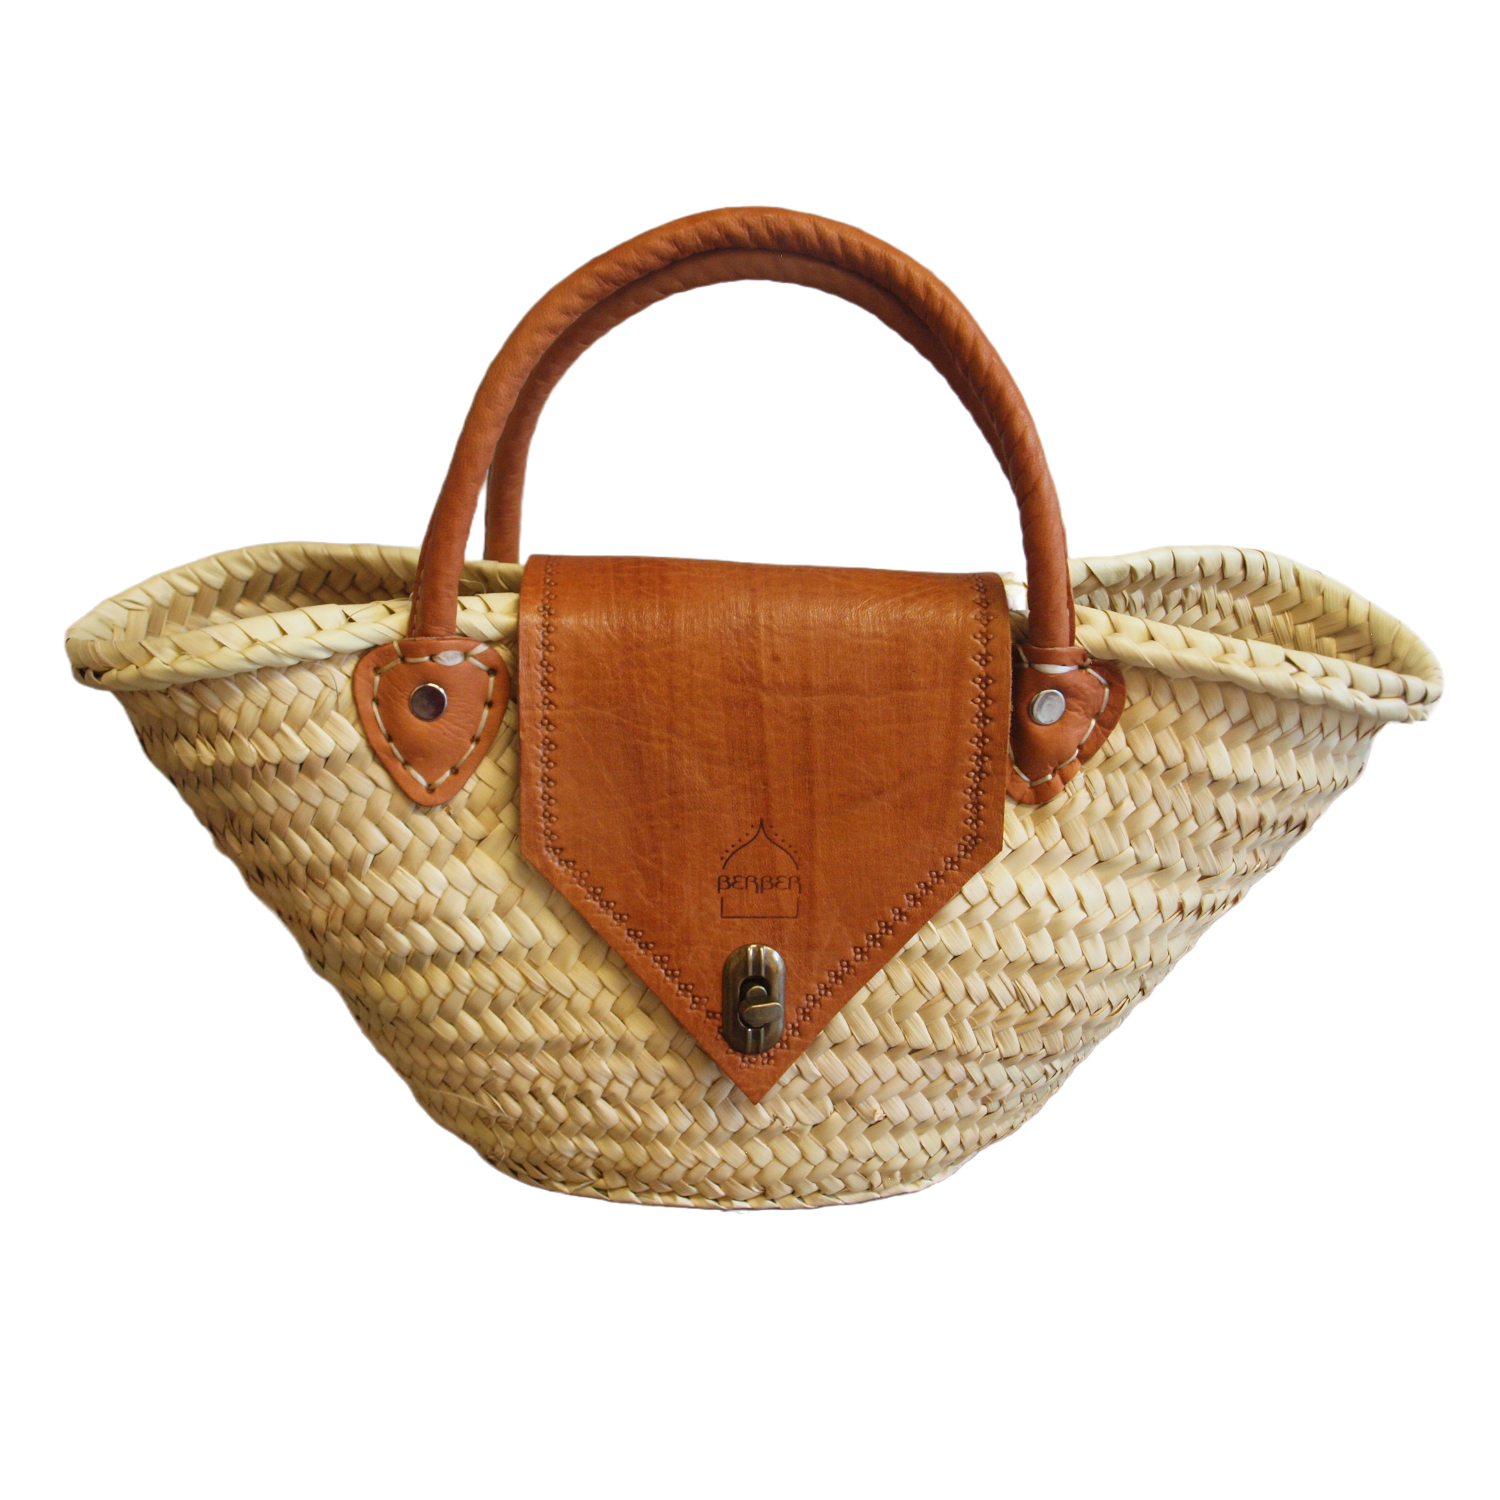 The Safi Small Rattan Beach Tote with White Background